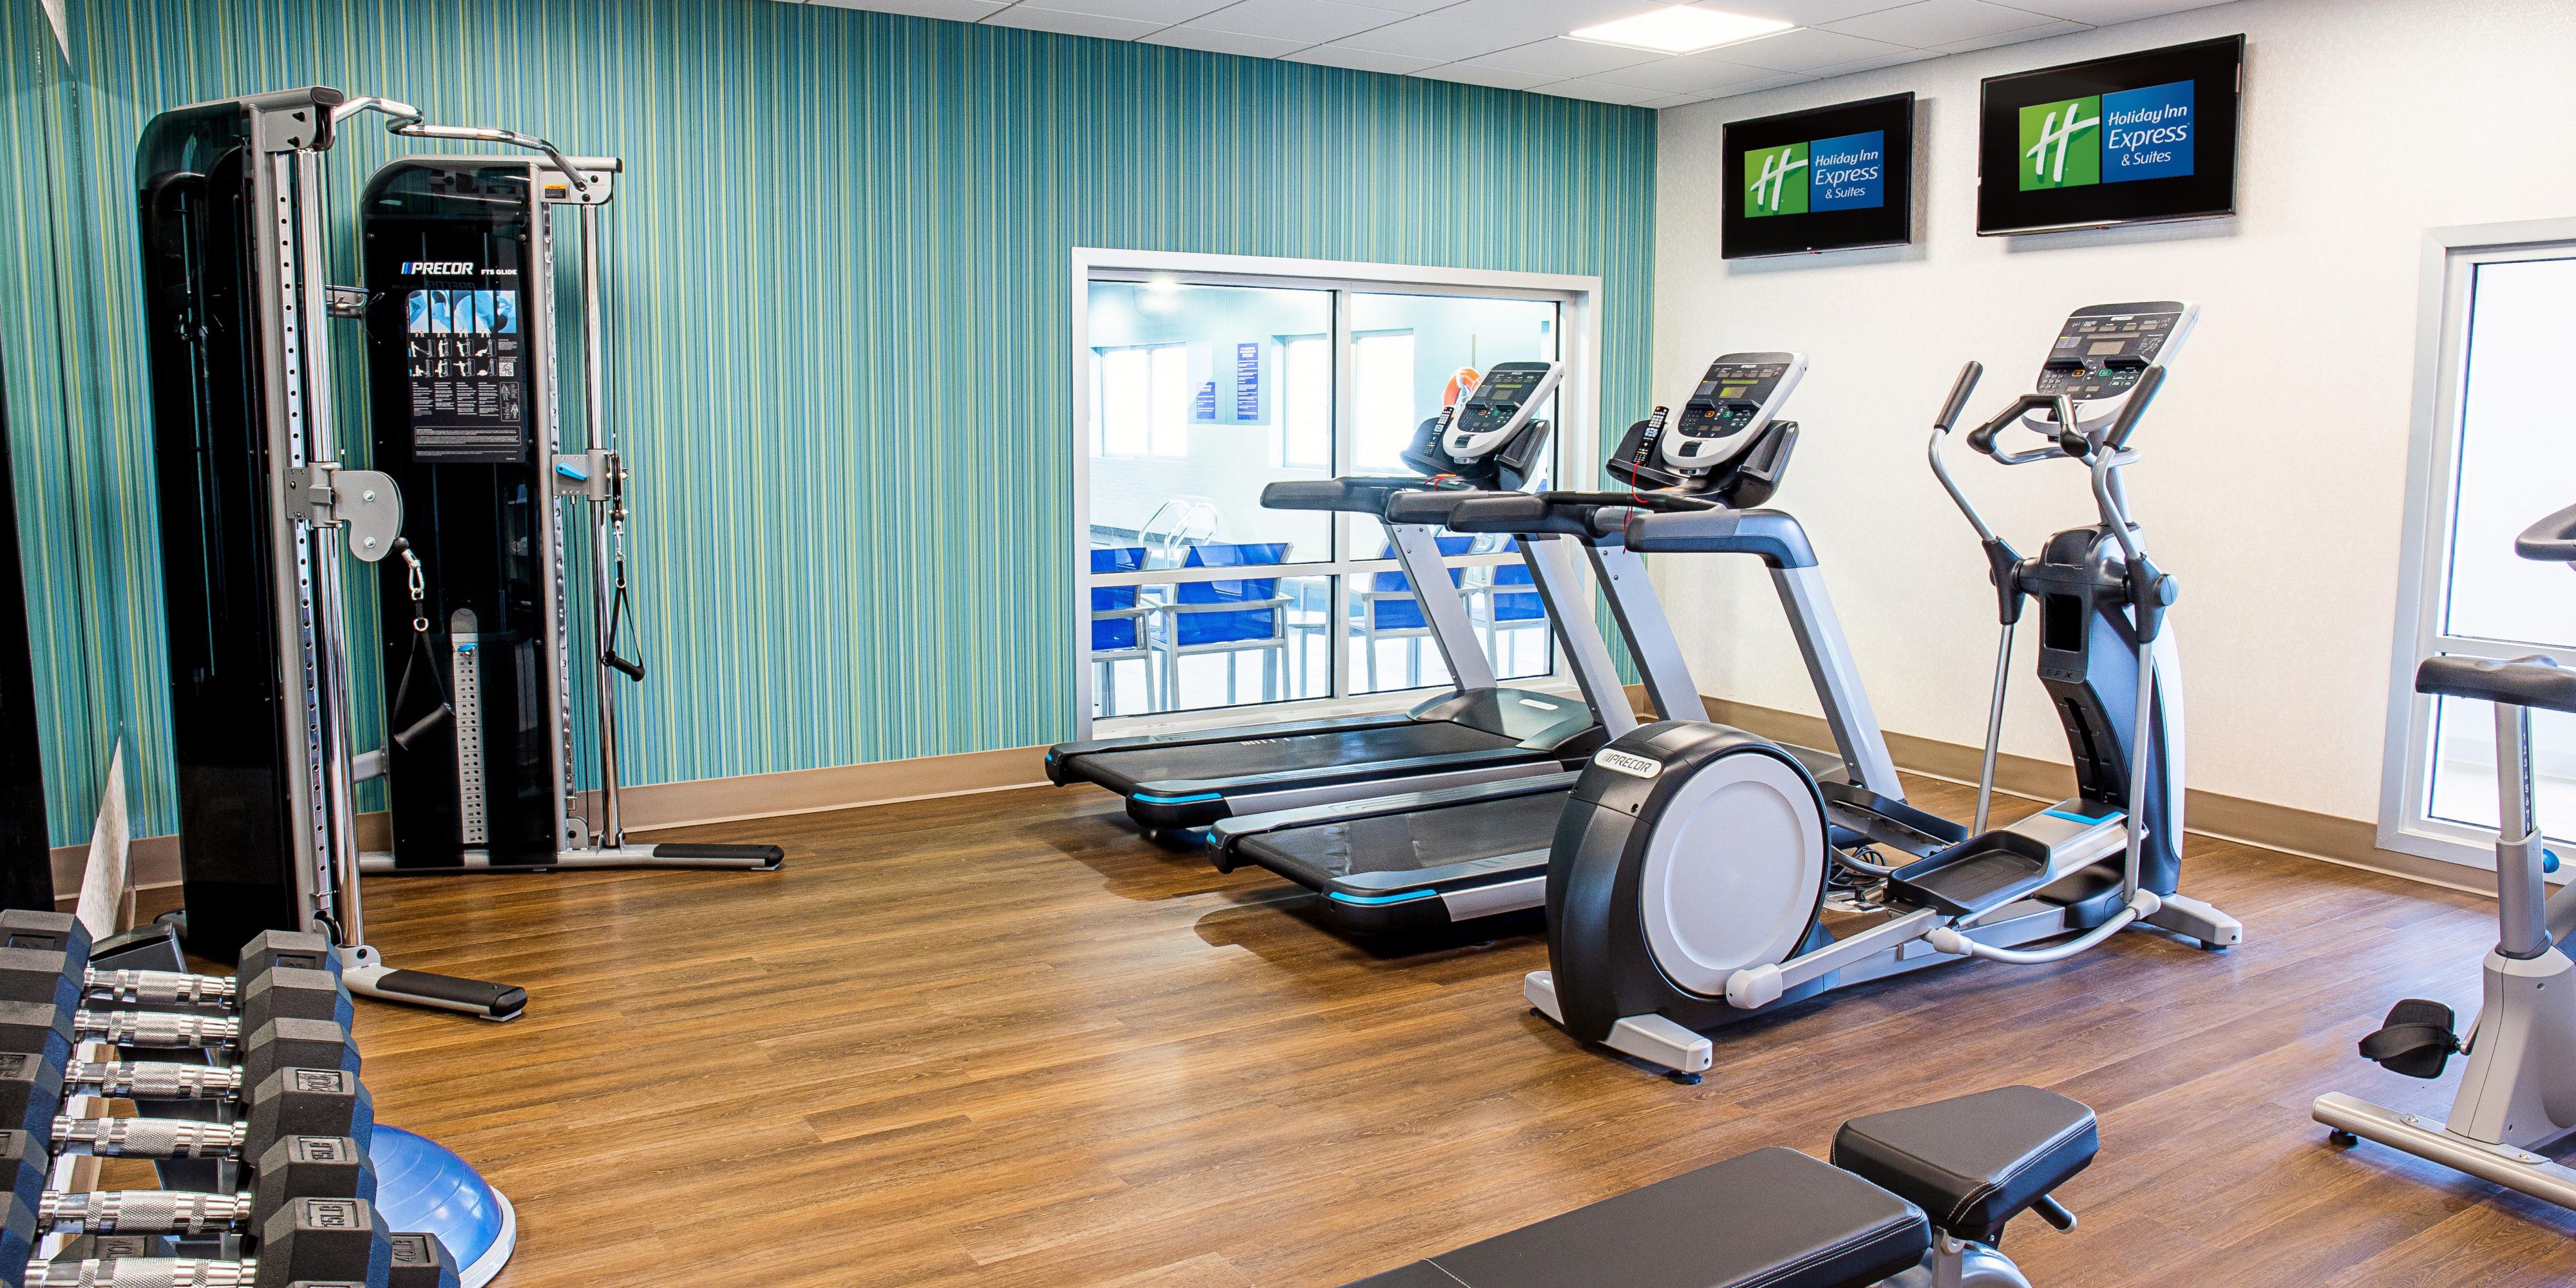 Our Fitness Centre has two treadmills, elliptical, bike, a multi-functional trainer and free weights.